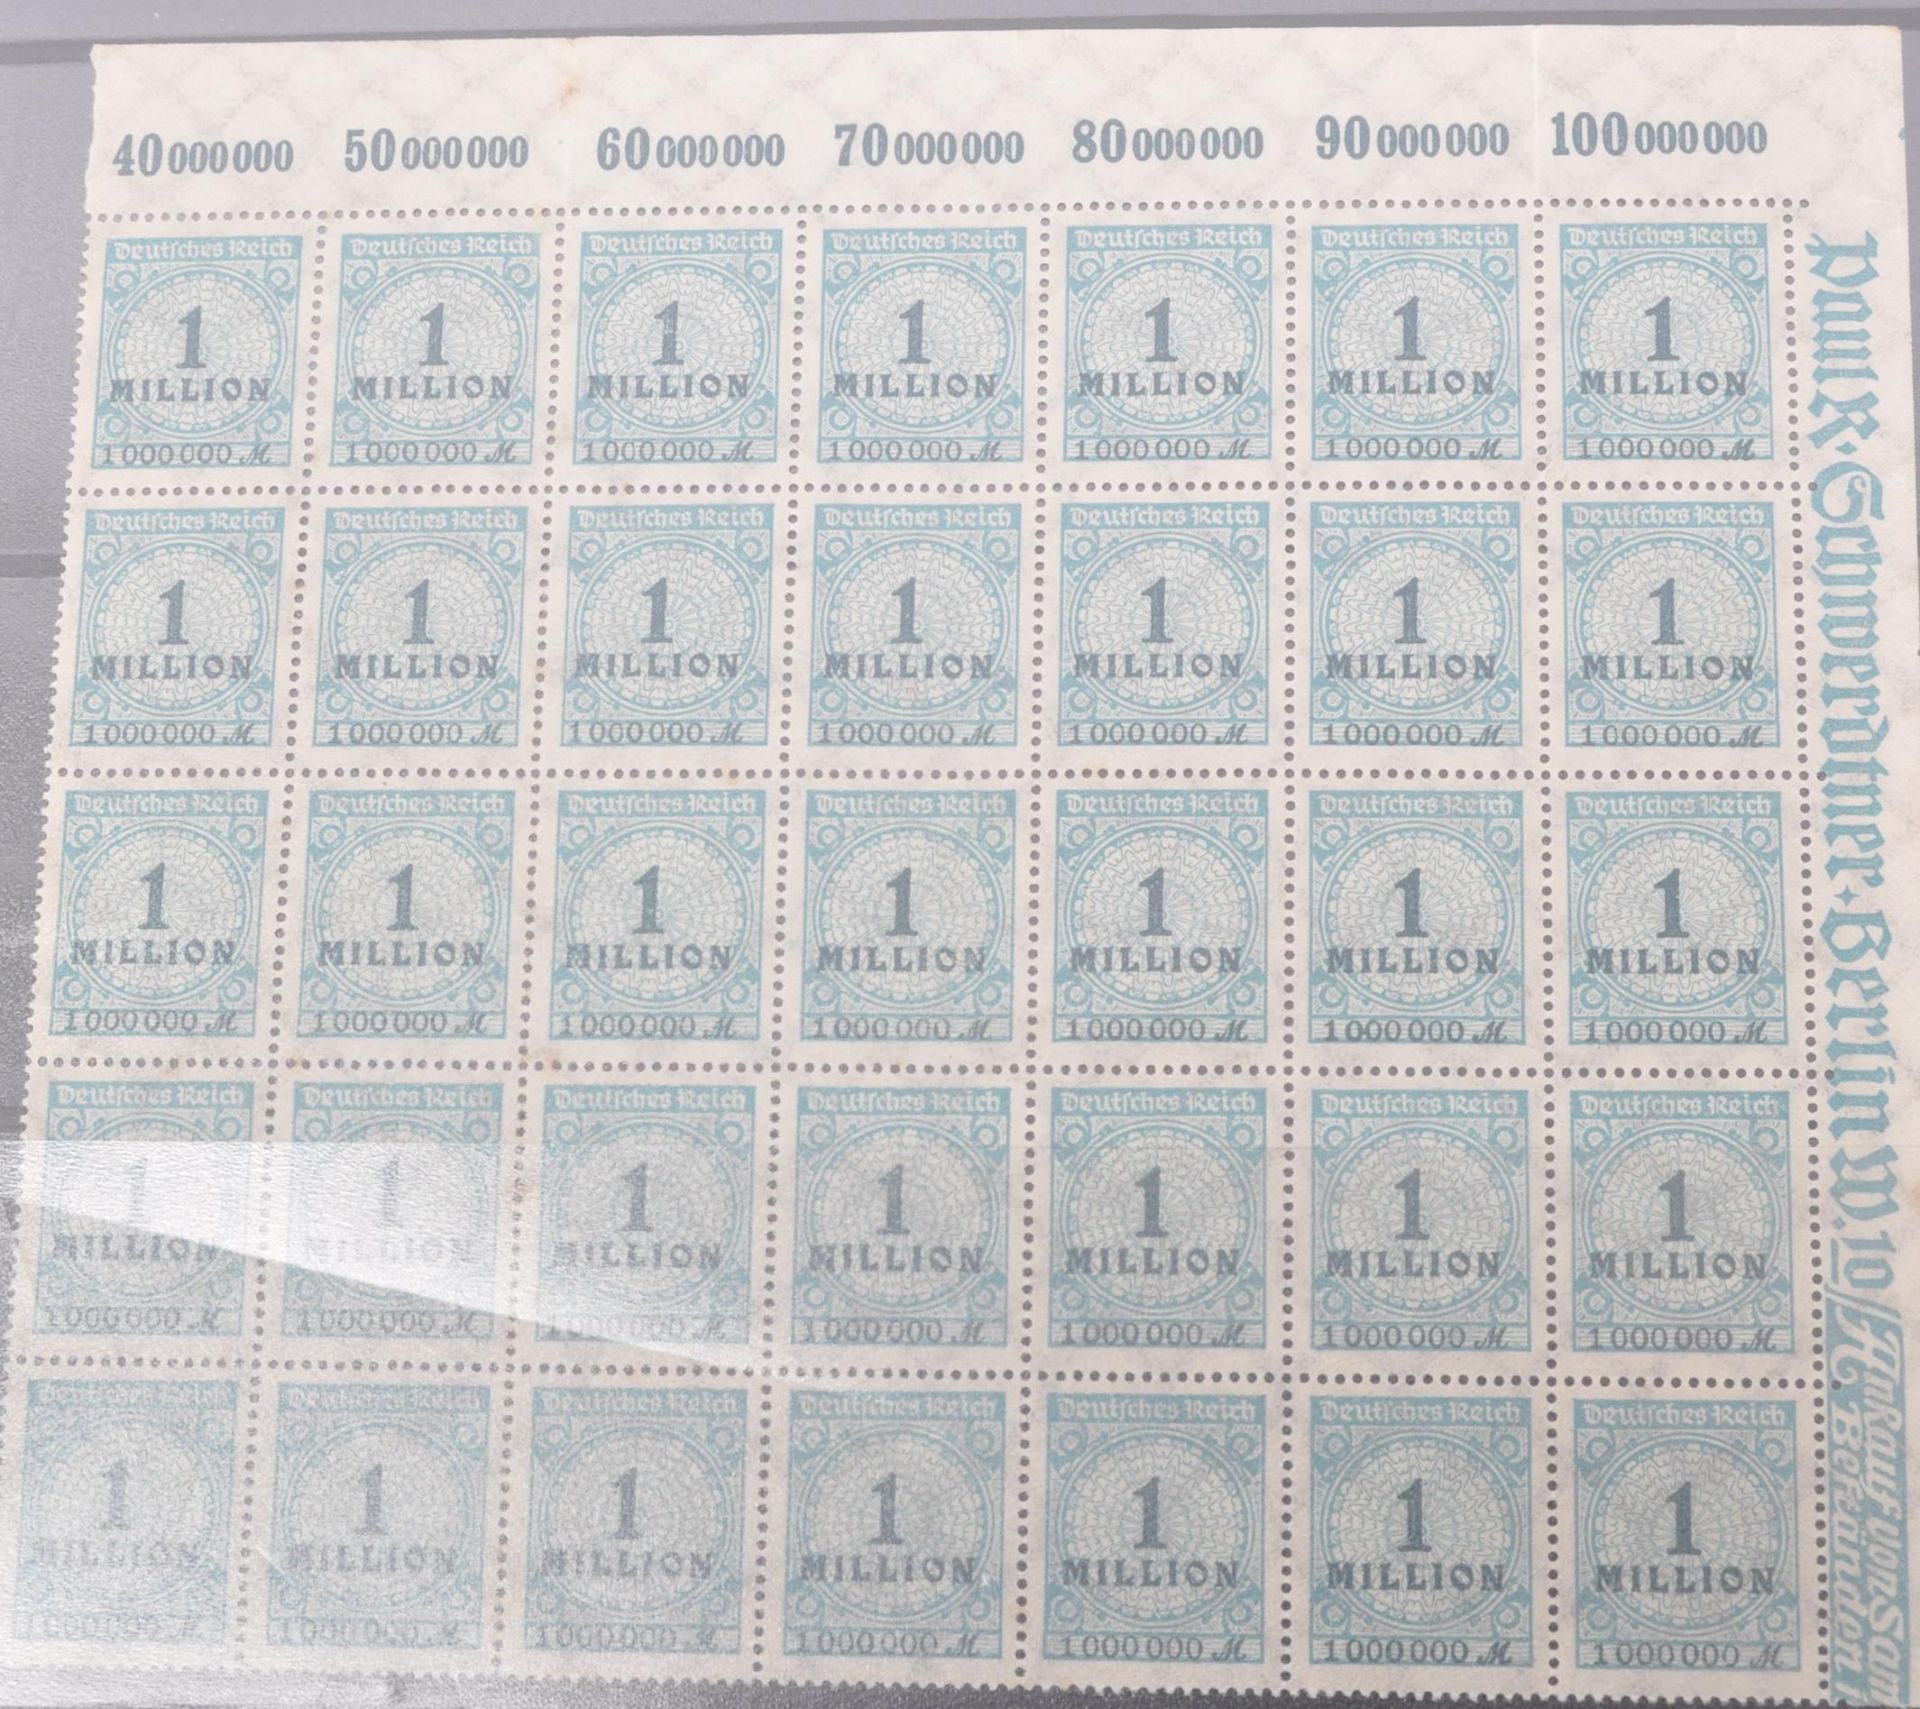 COLLECTION OF LATE 20TH CENTURY GERMAN POSTAGE STAMPS - Image 5 of 5